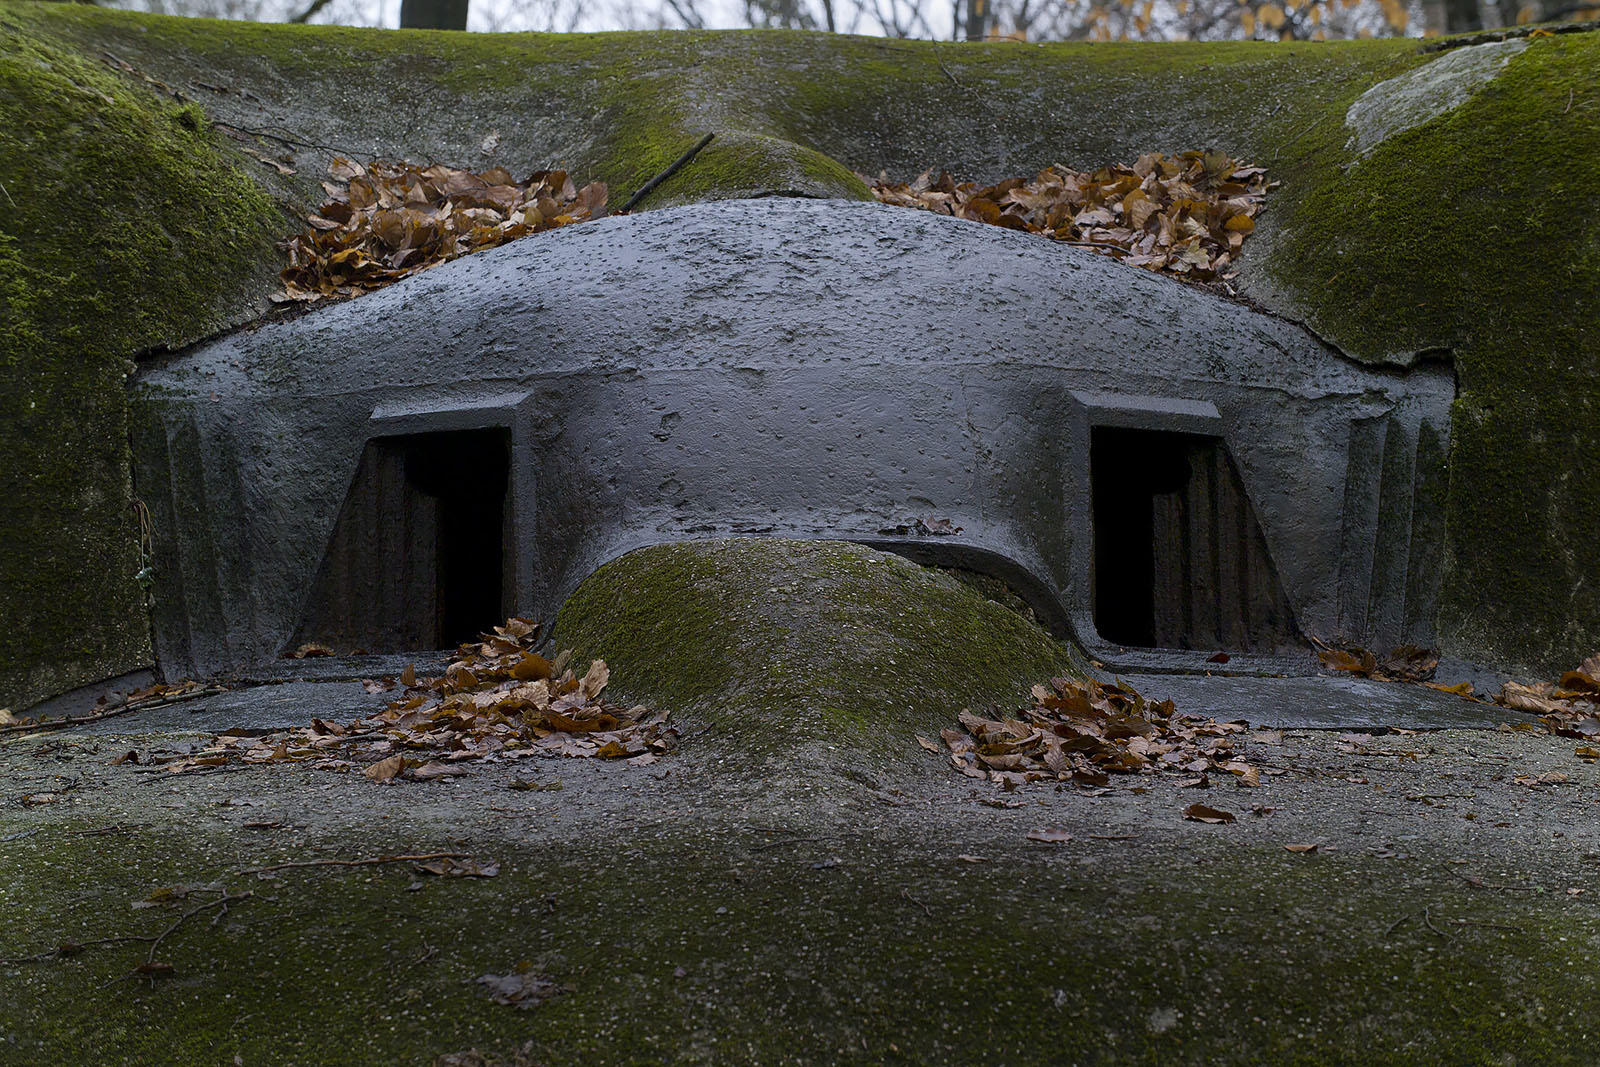 Modern photograph of the outside of a bunker set into a hill. There are two angled entrances into the bunker.